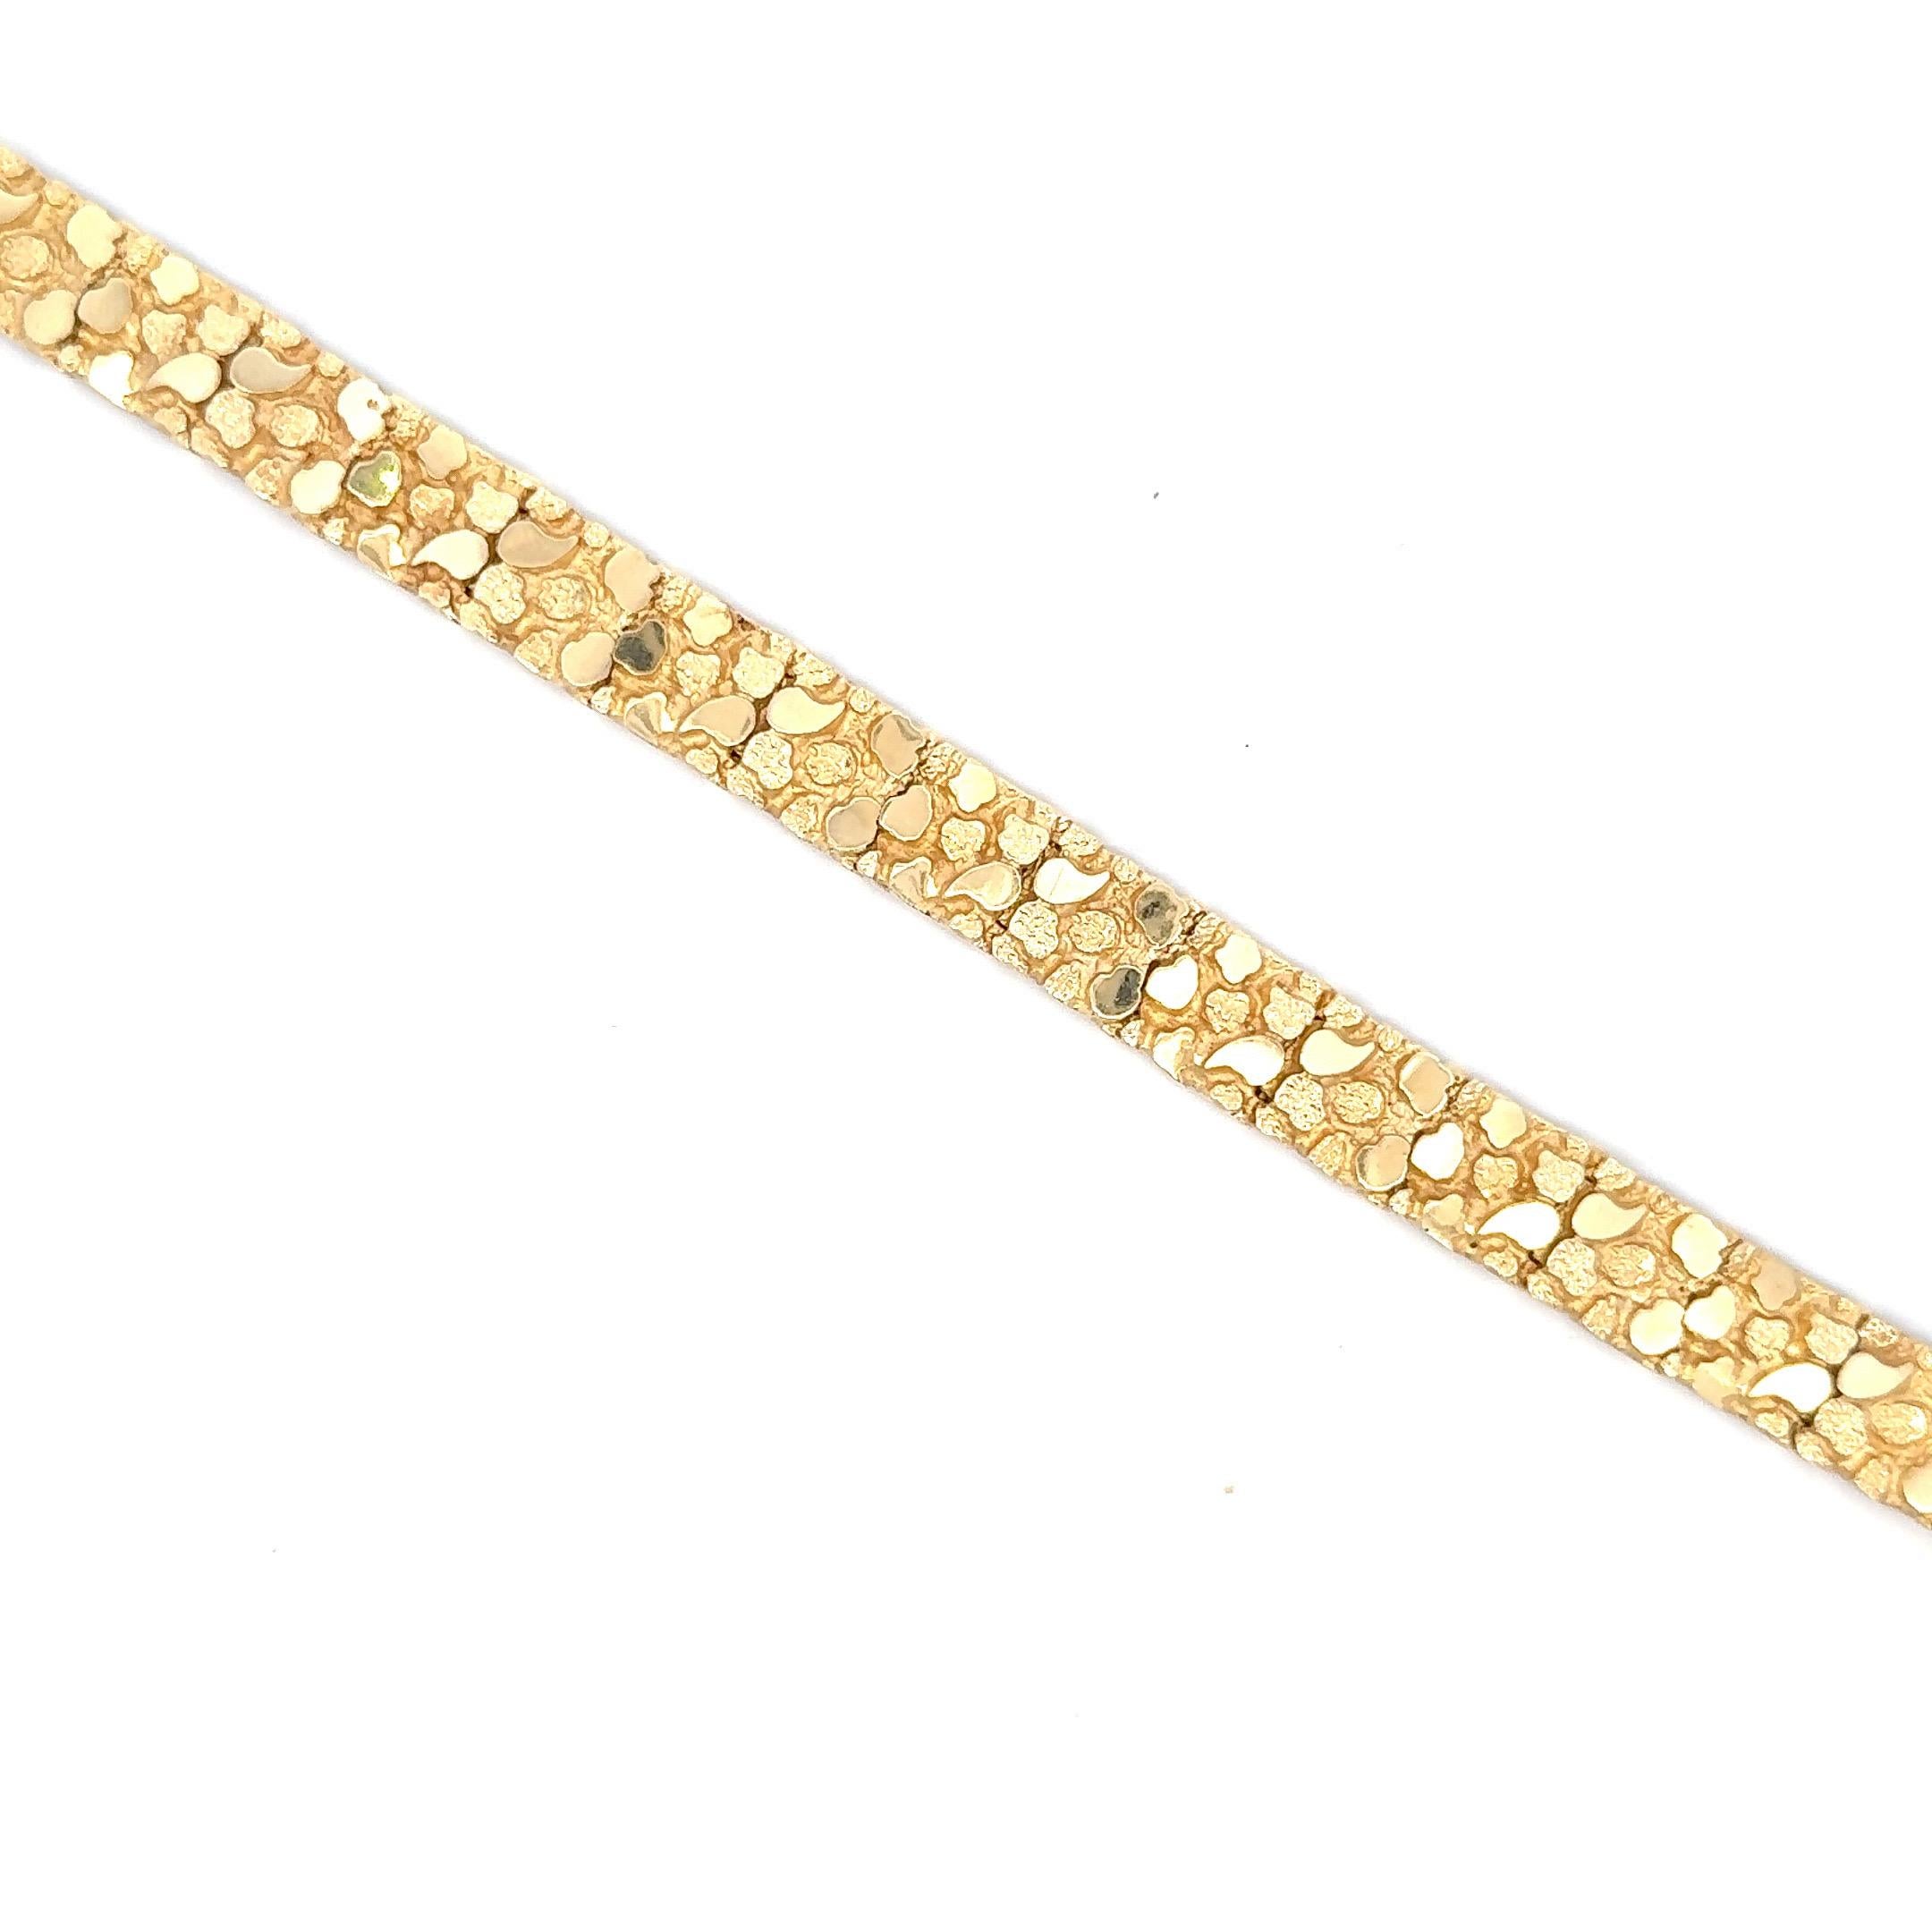 14 Karat Yellow Gold bracelet featuring a high polished and brushed finish stone motif design weighing 27.4 grams. 
